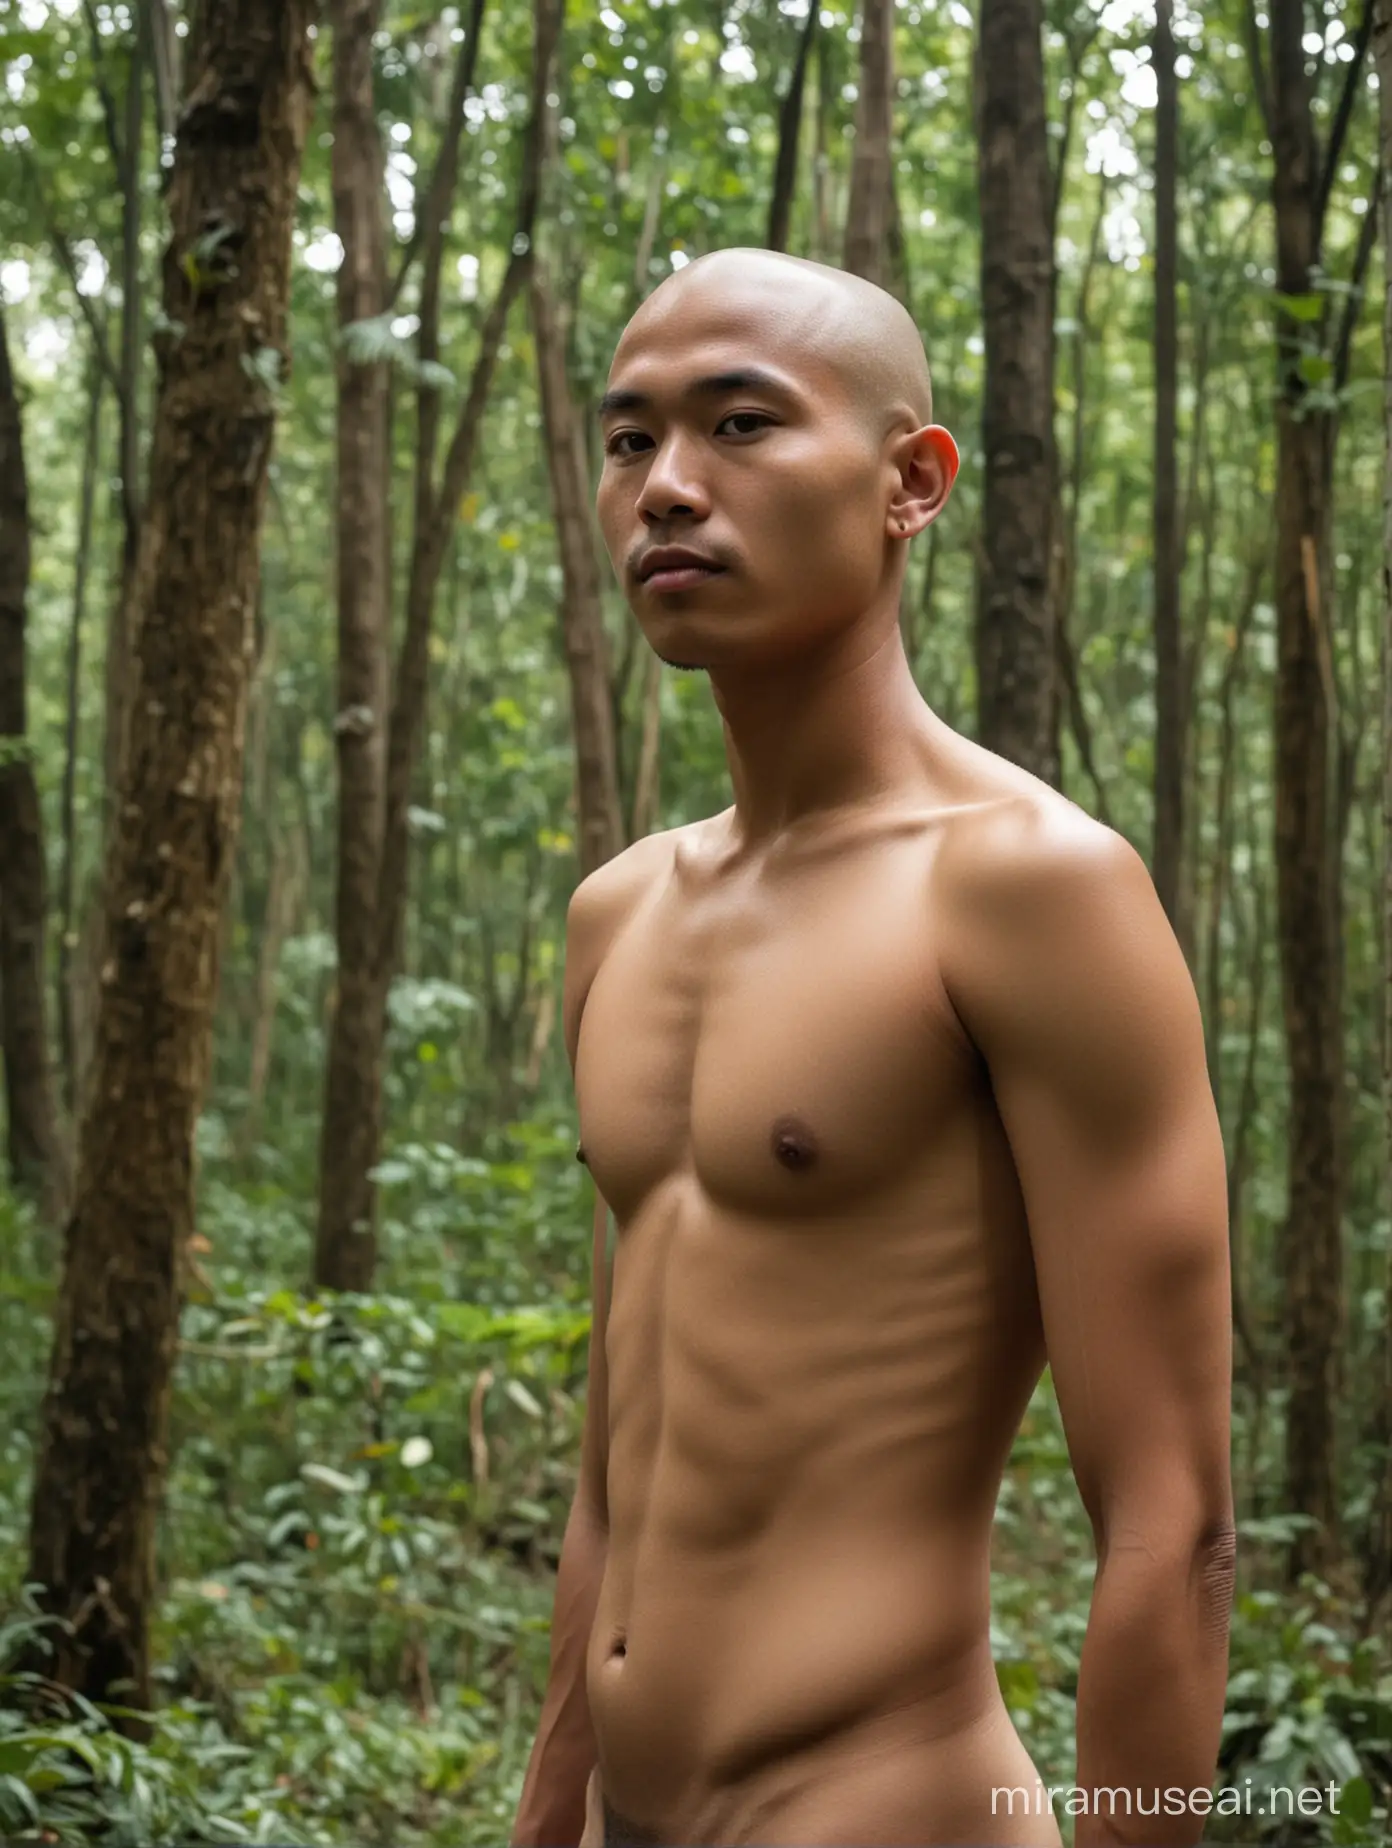 an indonesian young man, bald head, naked, vens, in the forest